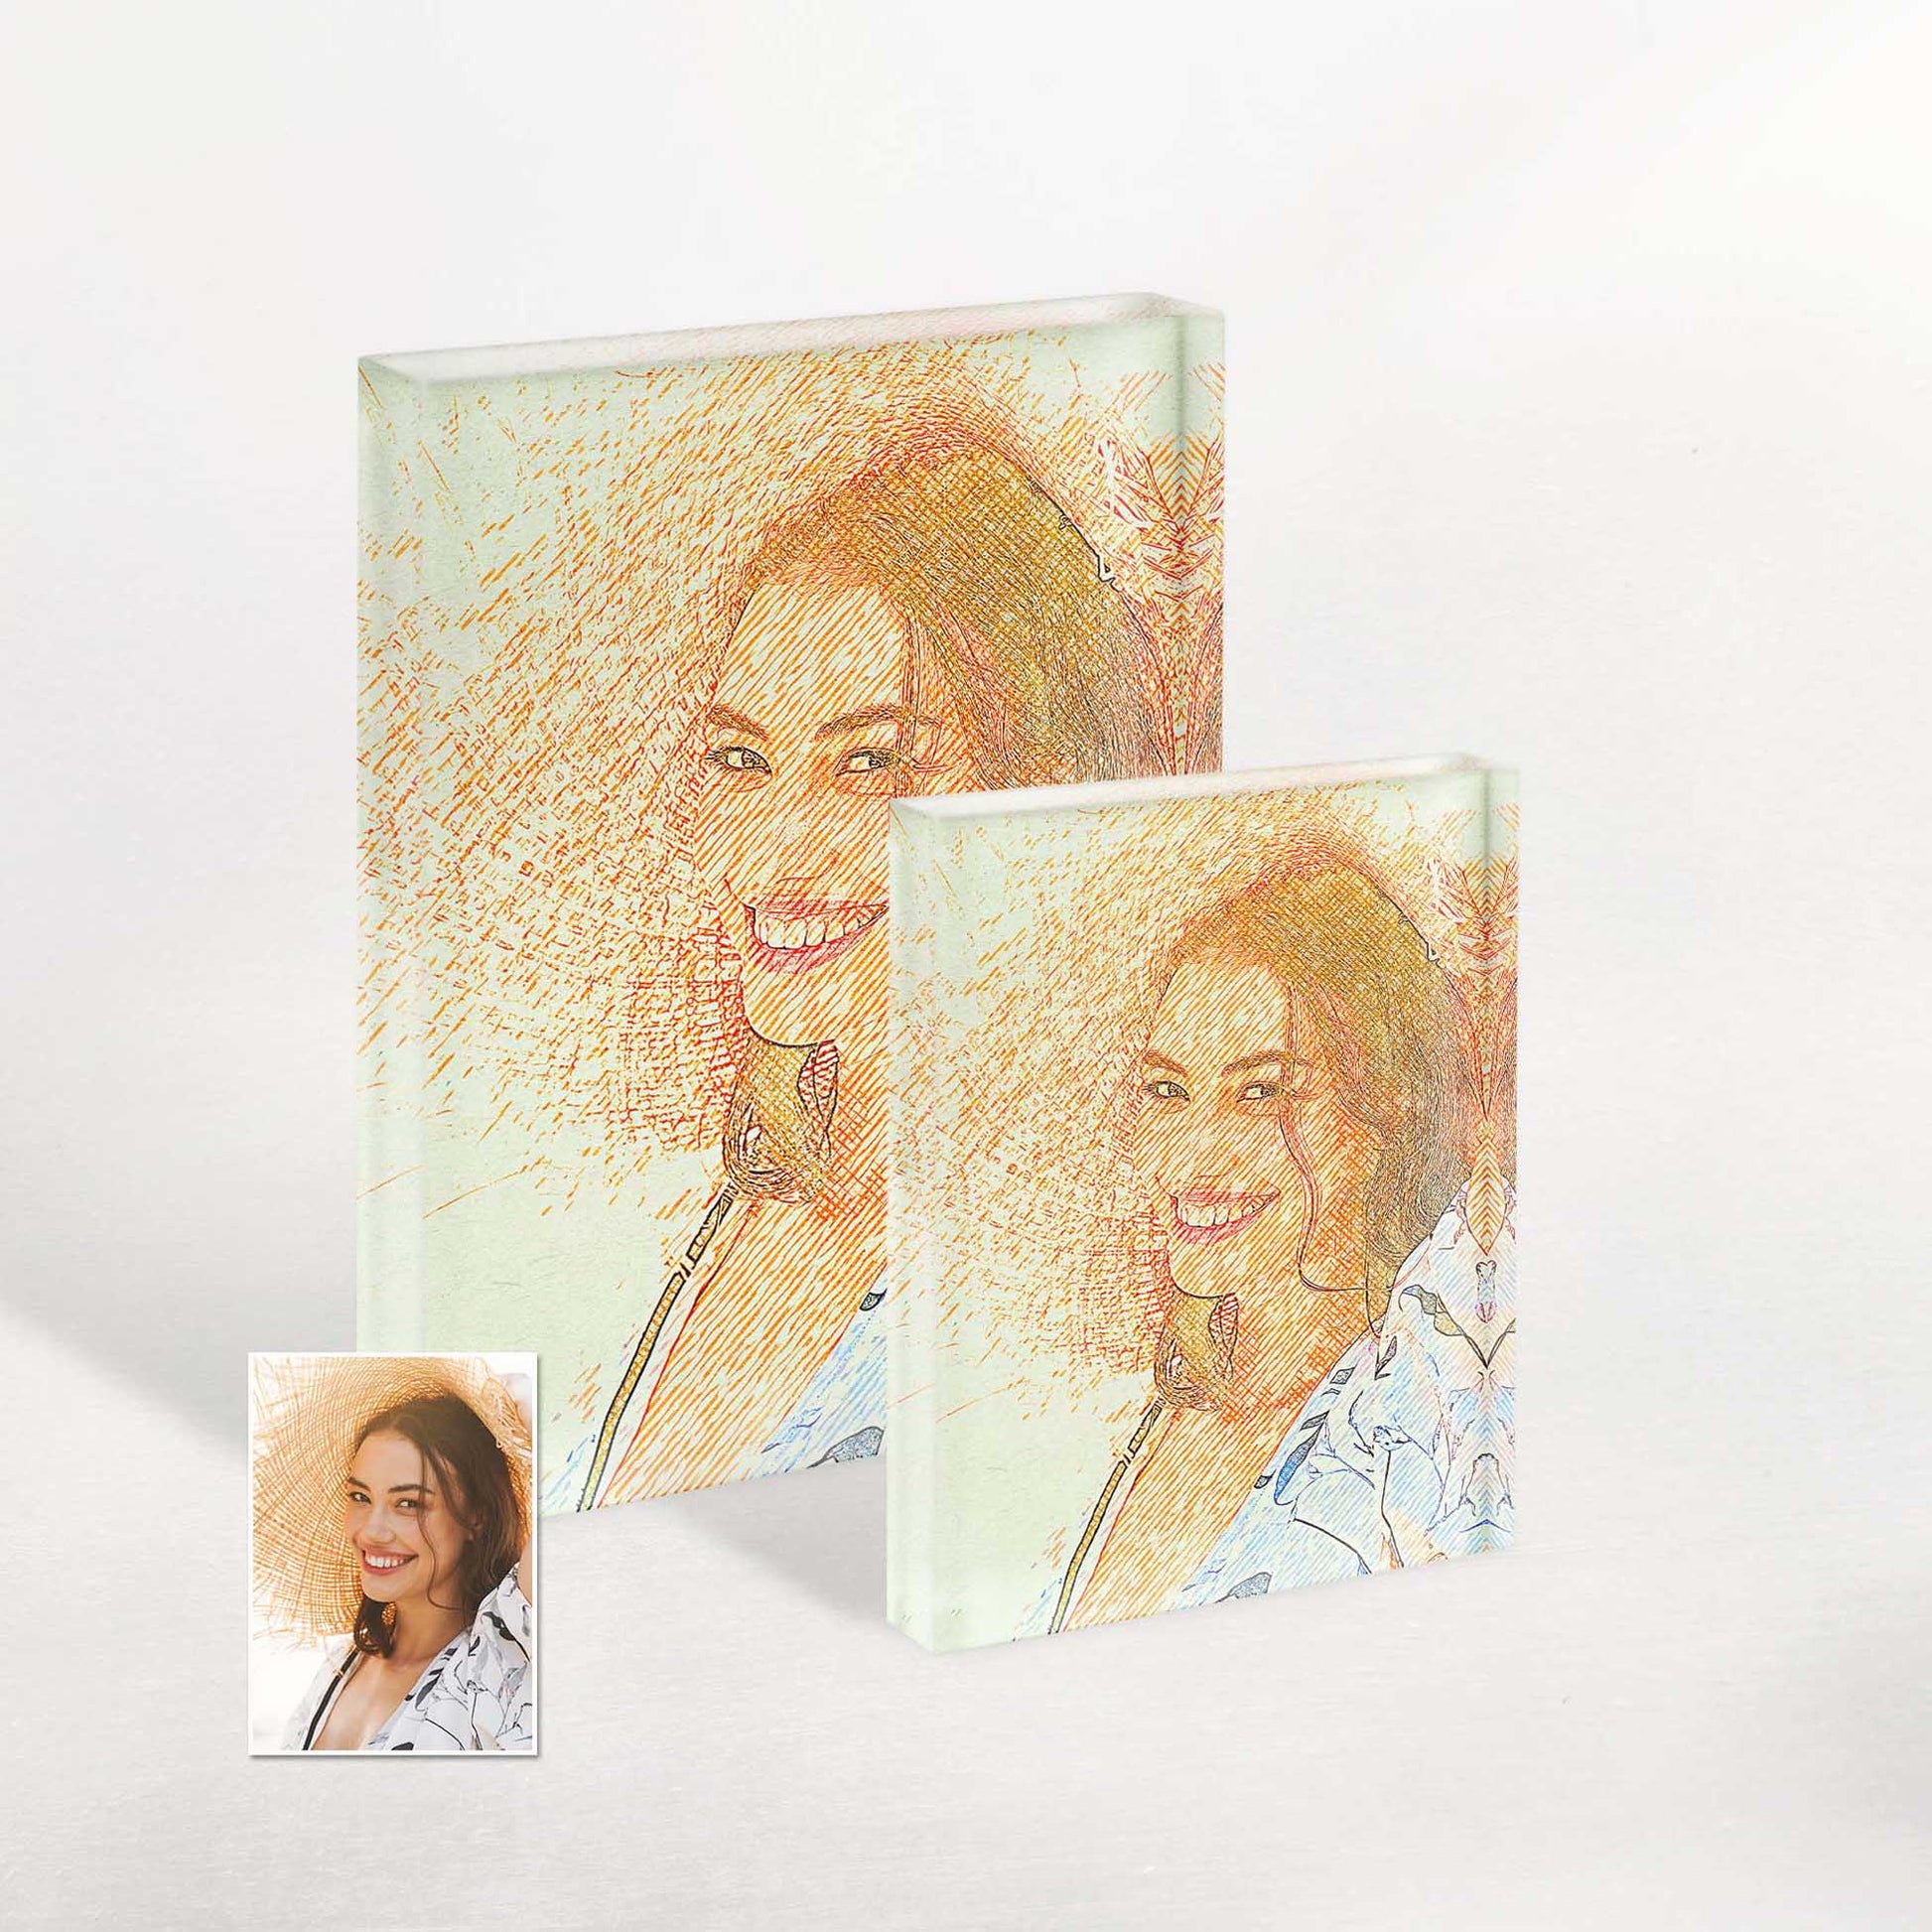 Infuse your home with happiness and excitement with our Personalised Drawing Crosshatch Acrylic Block Photo. Its natural and boho aesthetic creates a hip and joyful ambiance